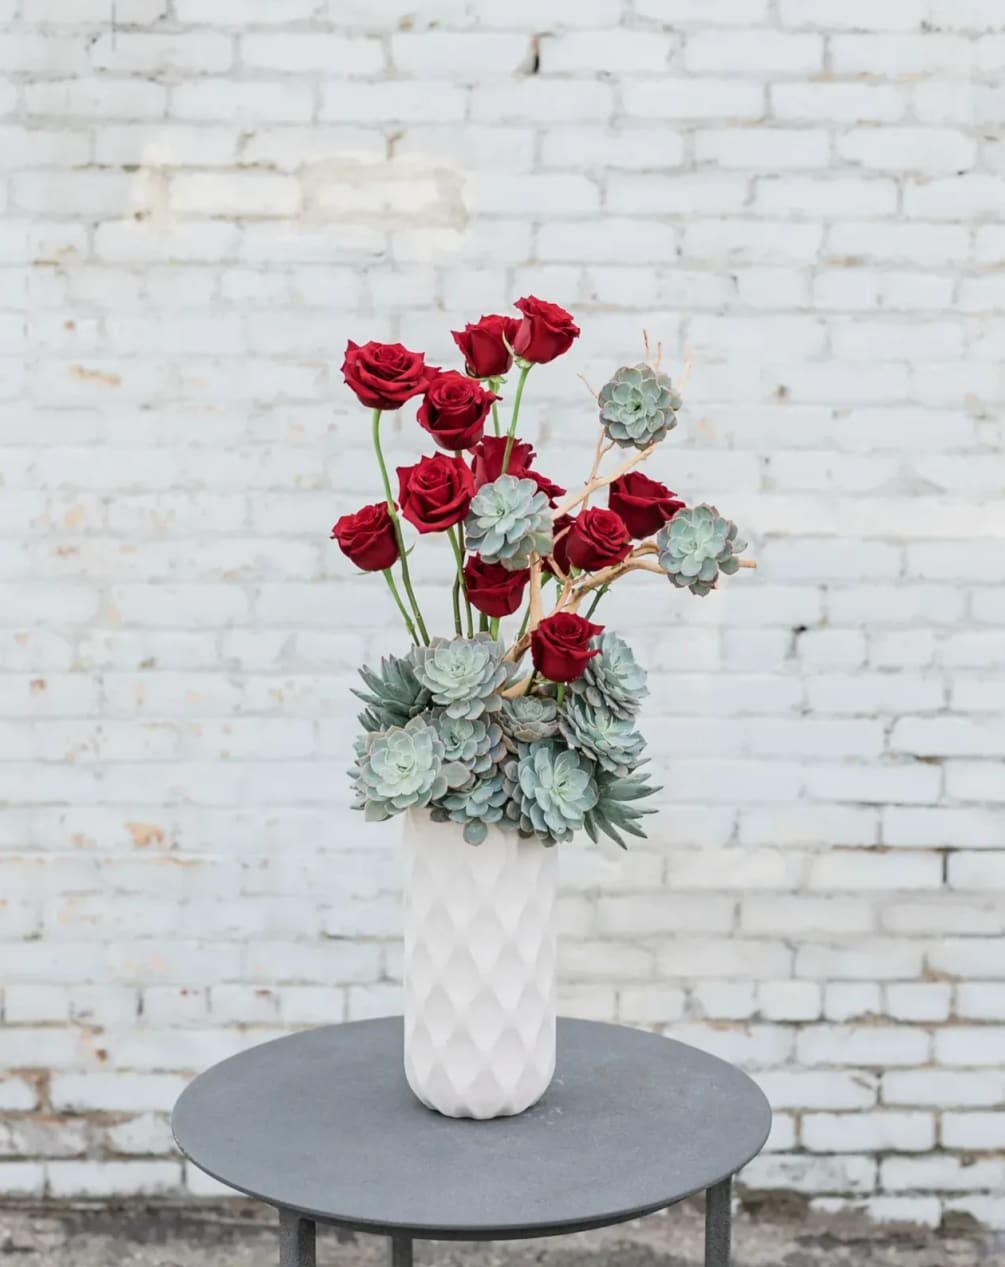 Love is Blooming this Valentine&rsquo;s Day Season! Make a statement and gift